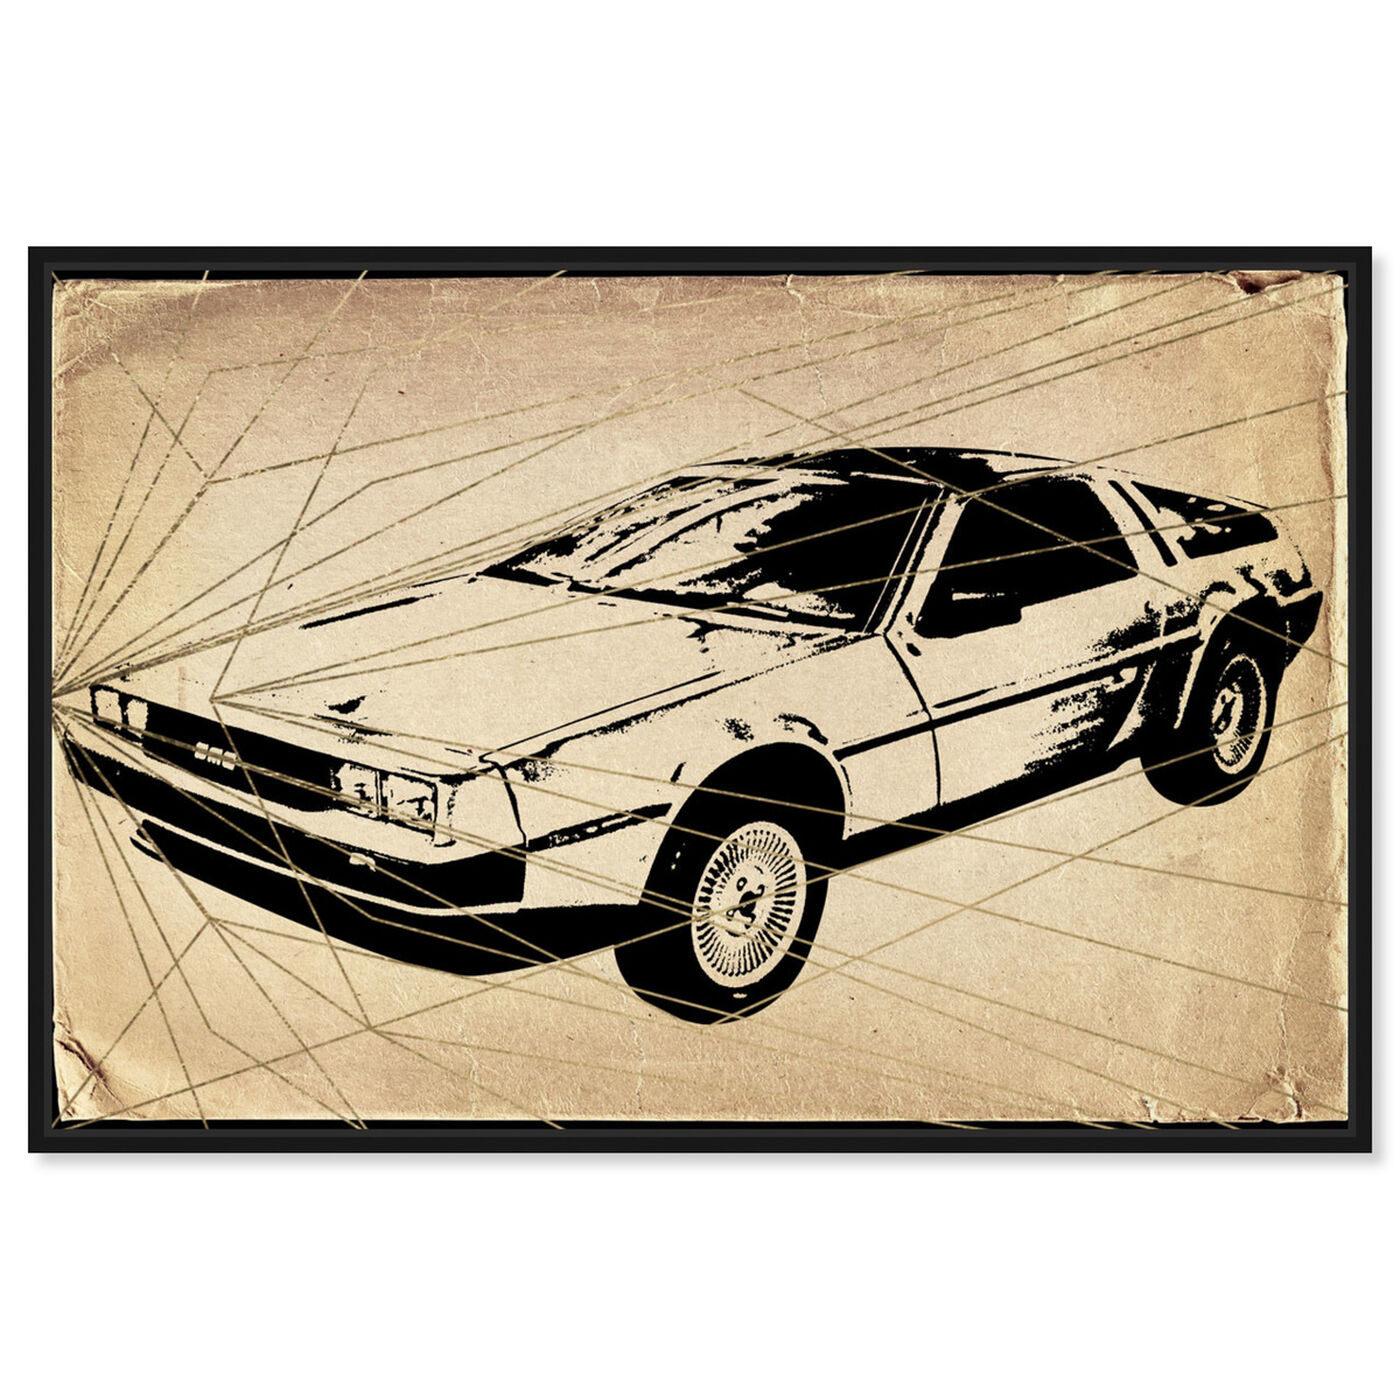 Front view of Delorean Print featuring transportation and automobiles art.